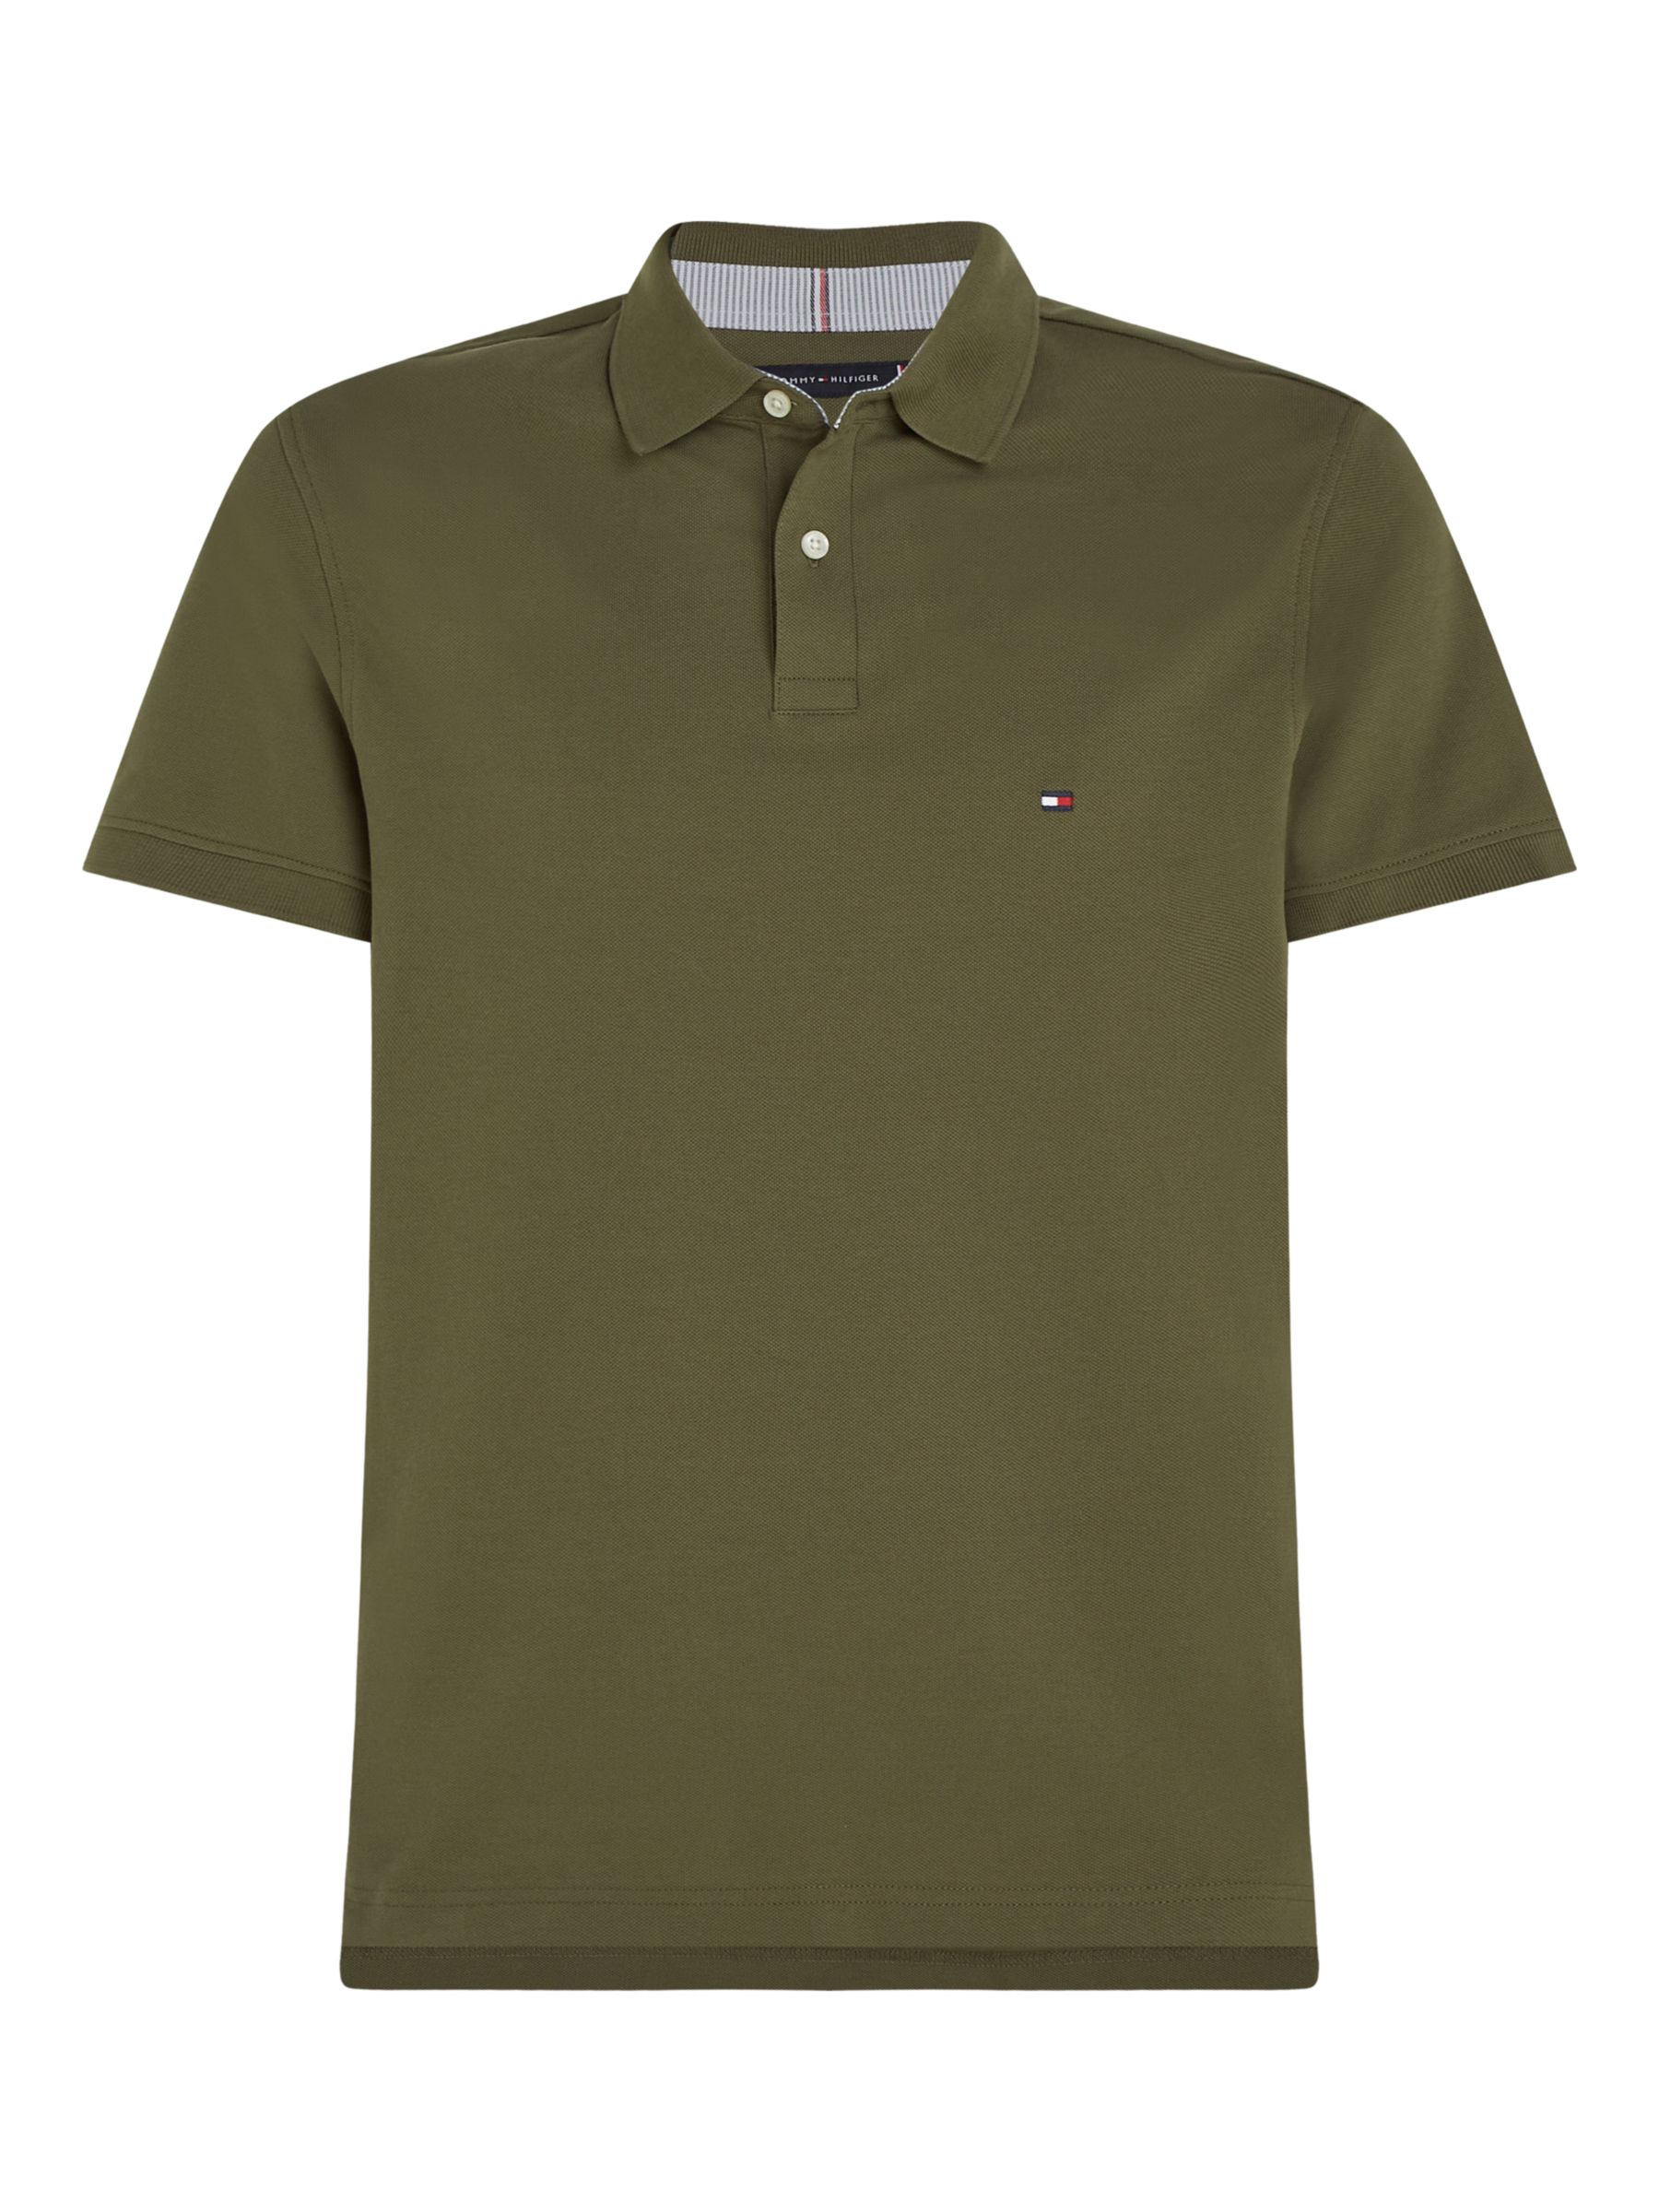 Tommy Hilfiger 1985 Regular Fit Polo Shirt, Army Green, XS